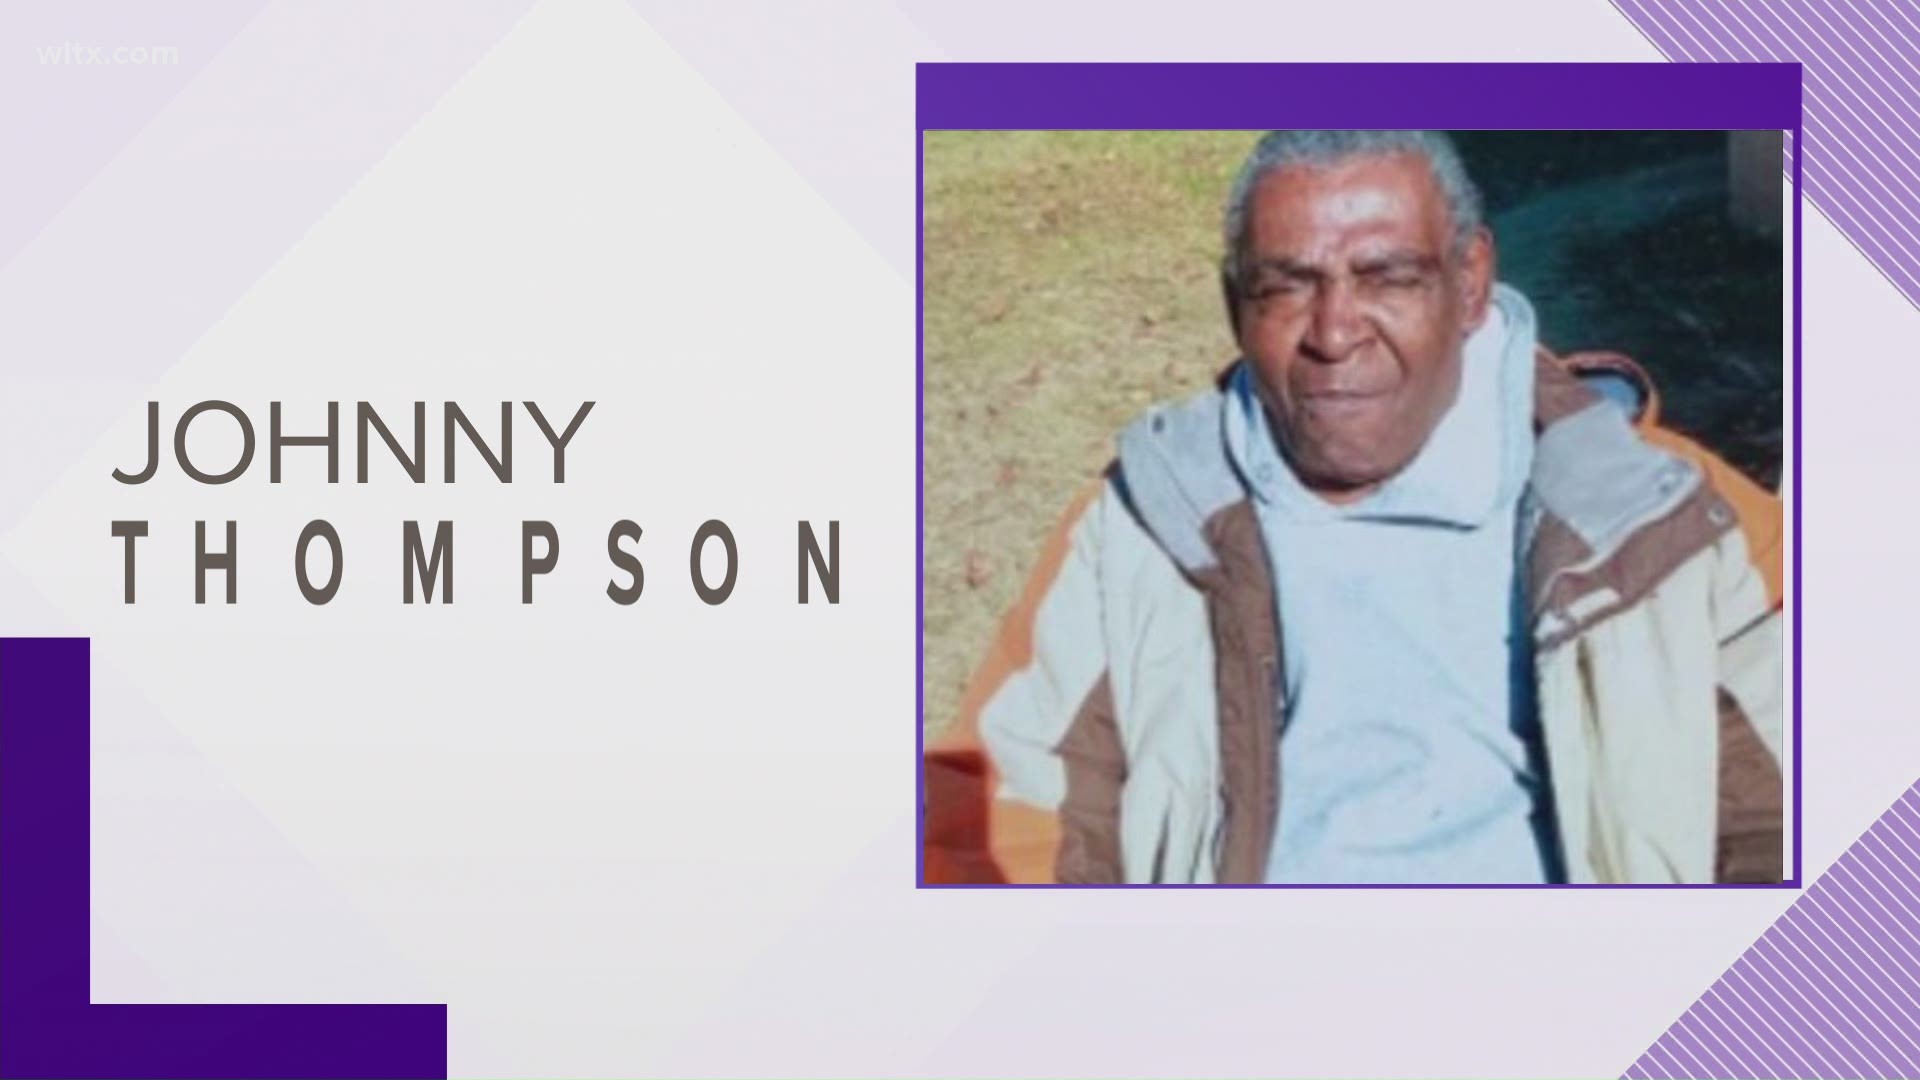 Johnny Thompson, 71, was last seen at a retirement home at the 800 block of Duke Ave. on March 3.